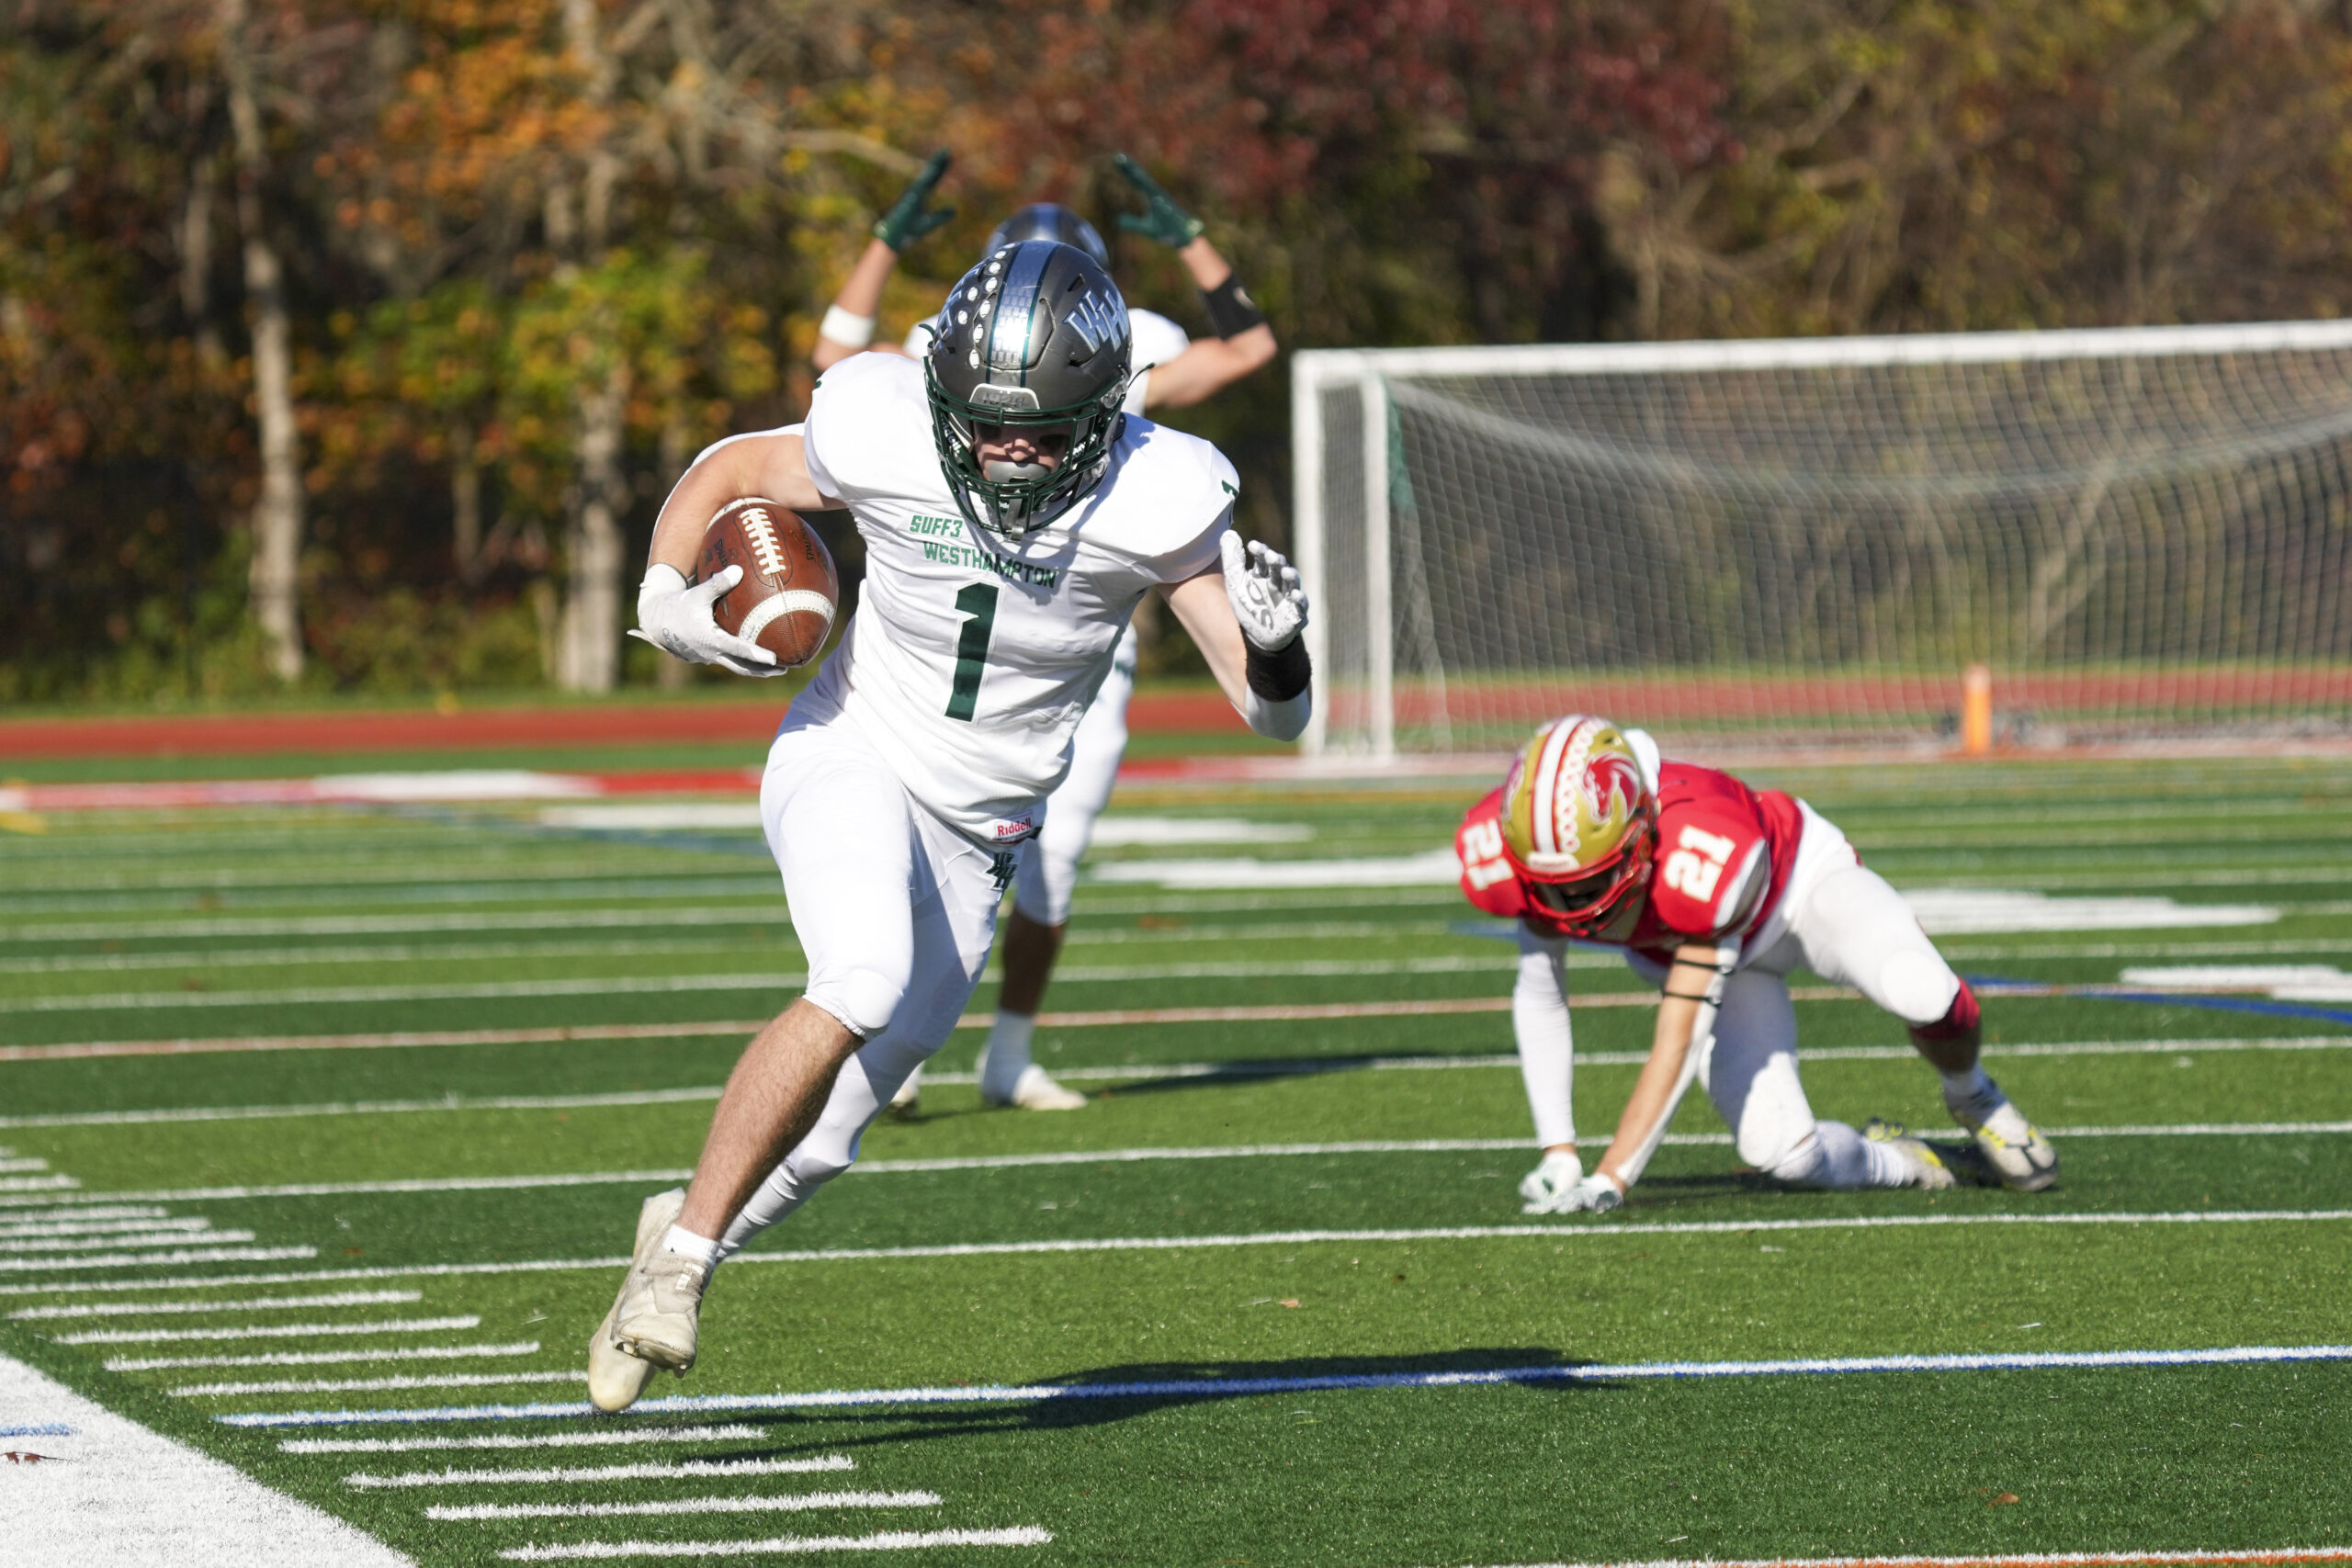 Westhampton Beach junior Kevin Smith sprints down the sideline after making a catch and eluding a Hills West defender.    RON ESPOSITO